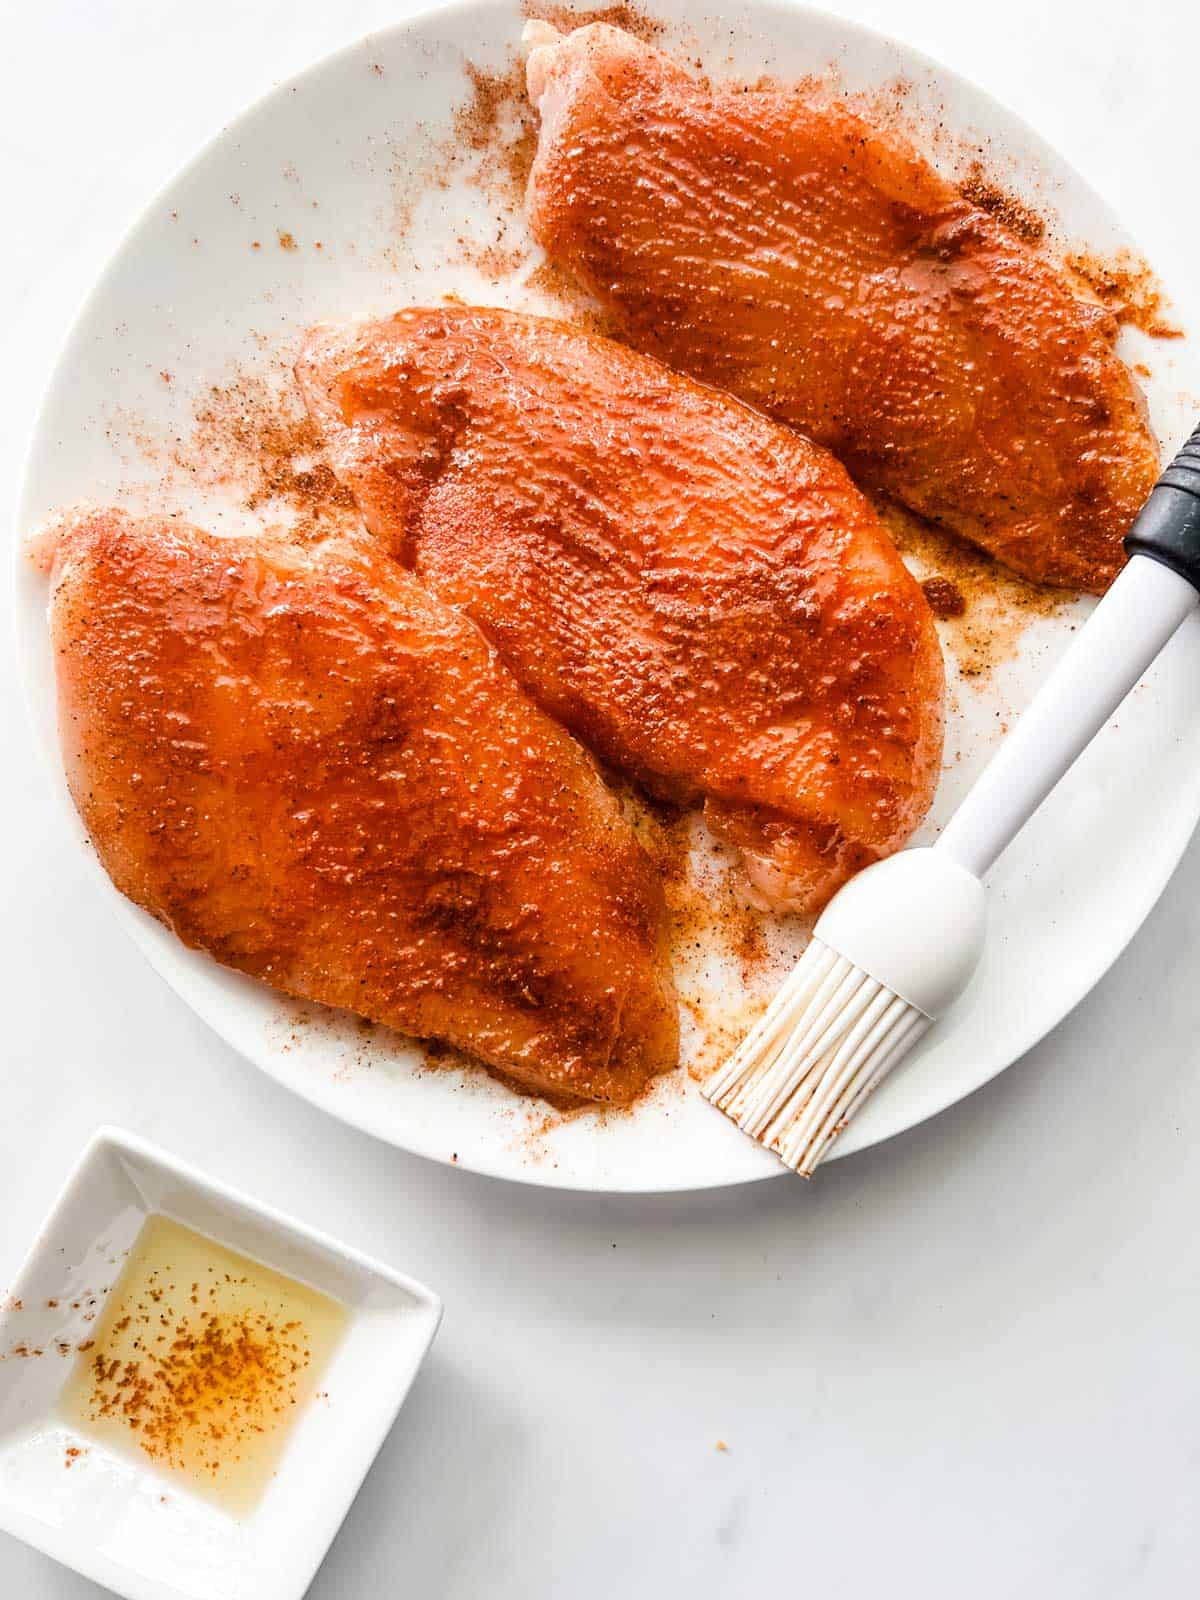 Seasoned chicken breast being brushed with oil.